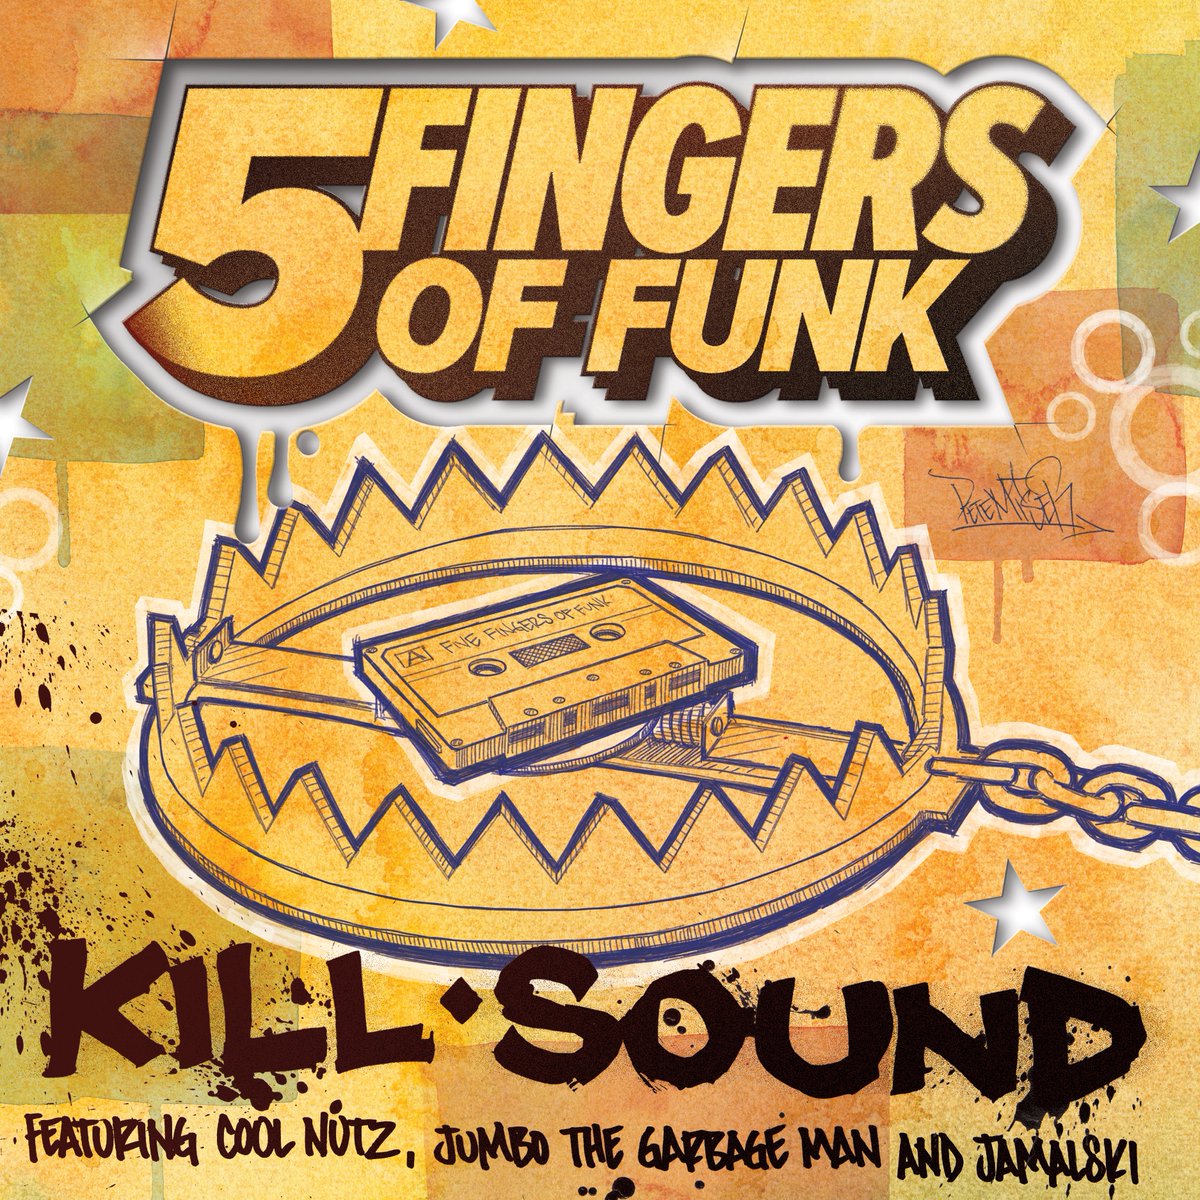 'Point blank period, the song is fire.' - @SpeedontheBeat on @5FingersOfFunk's 'Kill Sound'!!! We couldn't agree more. Check out the full review.